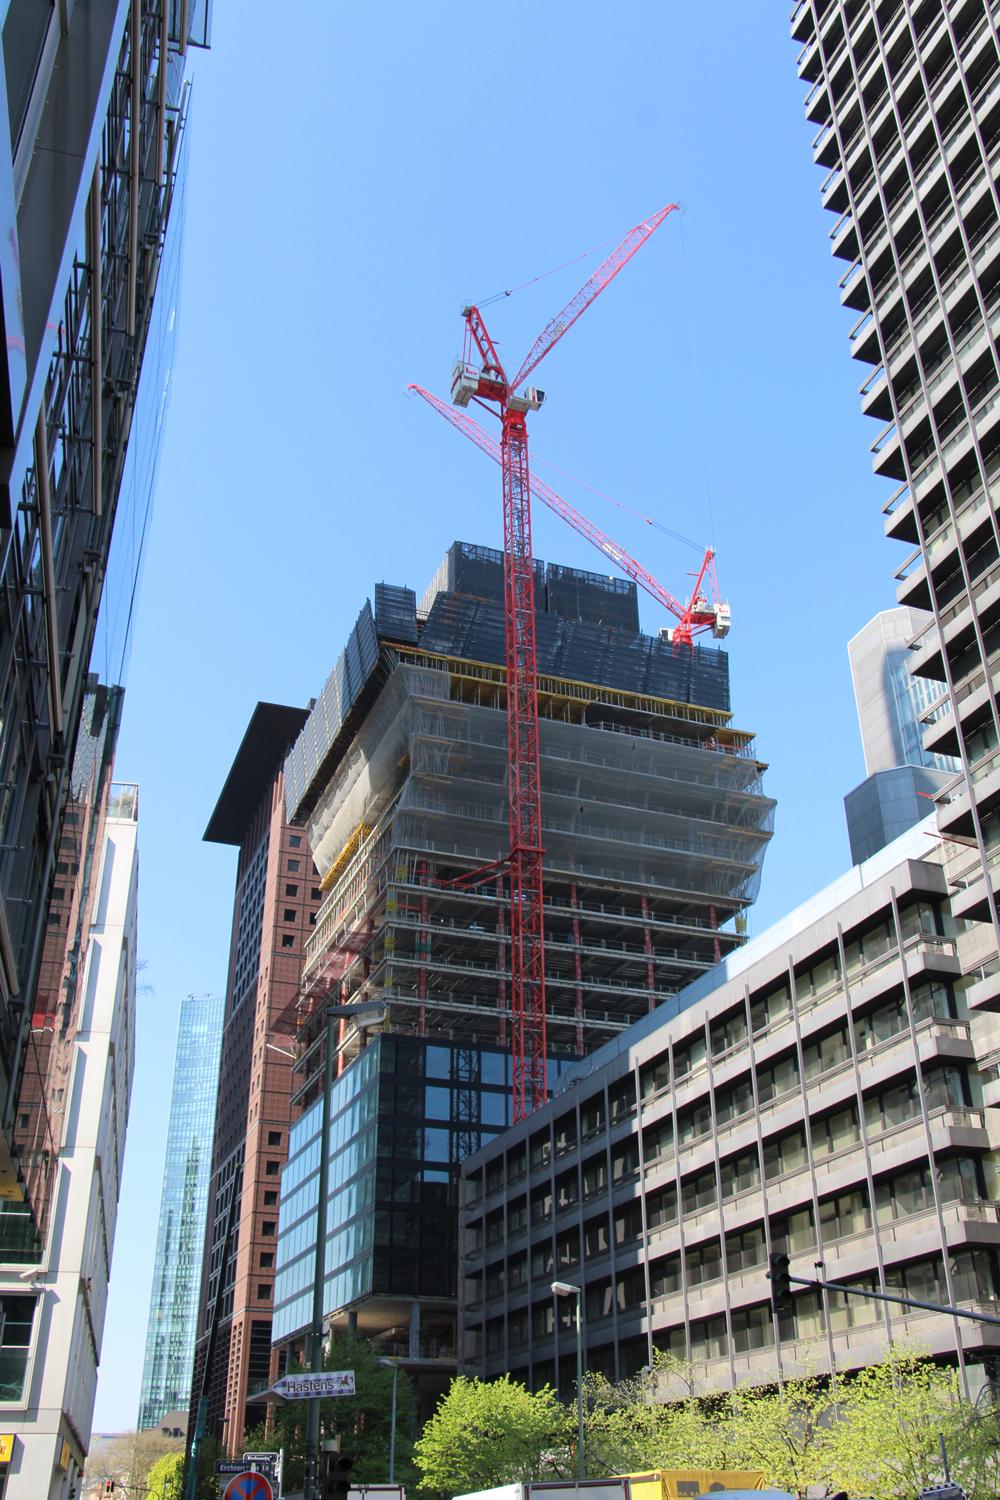 Highrise construction takes on new dimensions with Doka Formwork